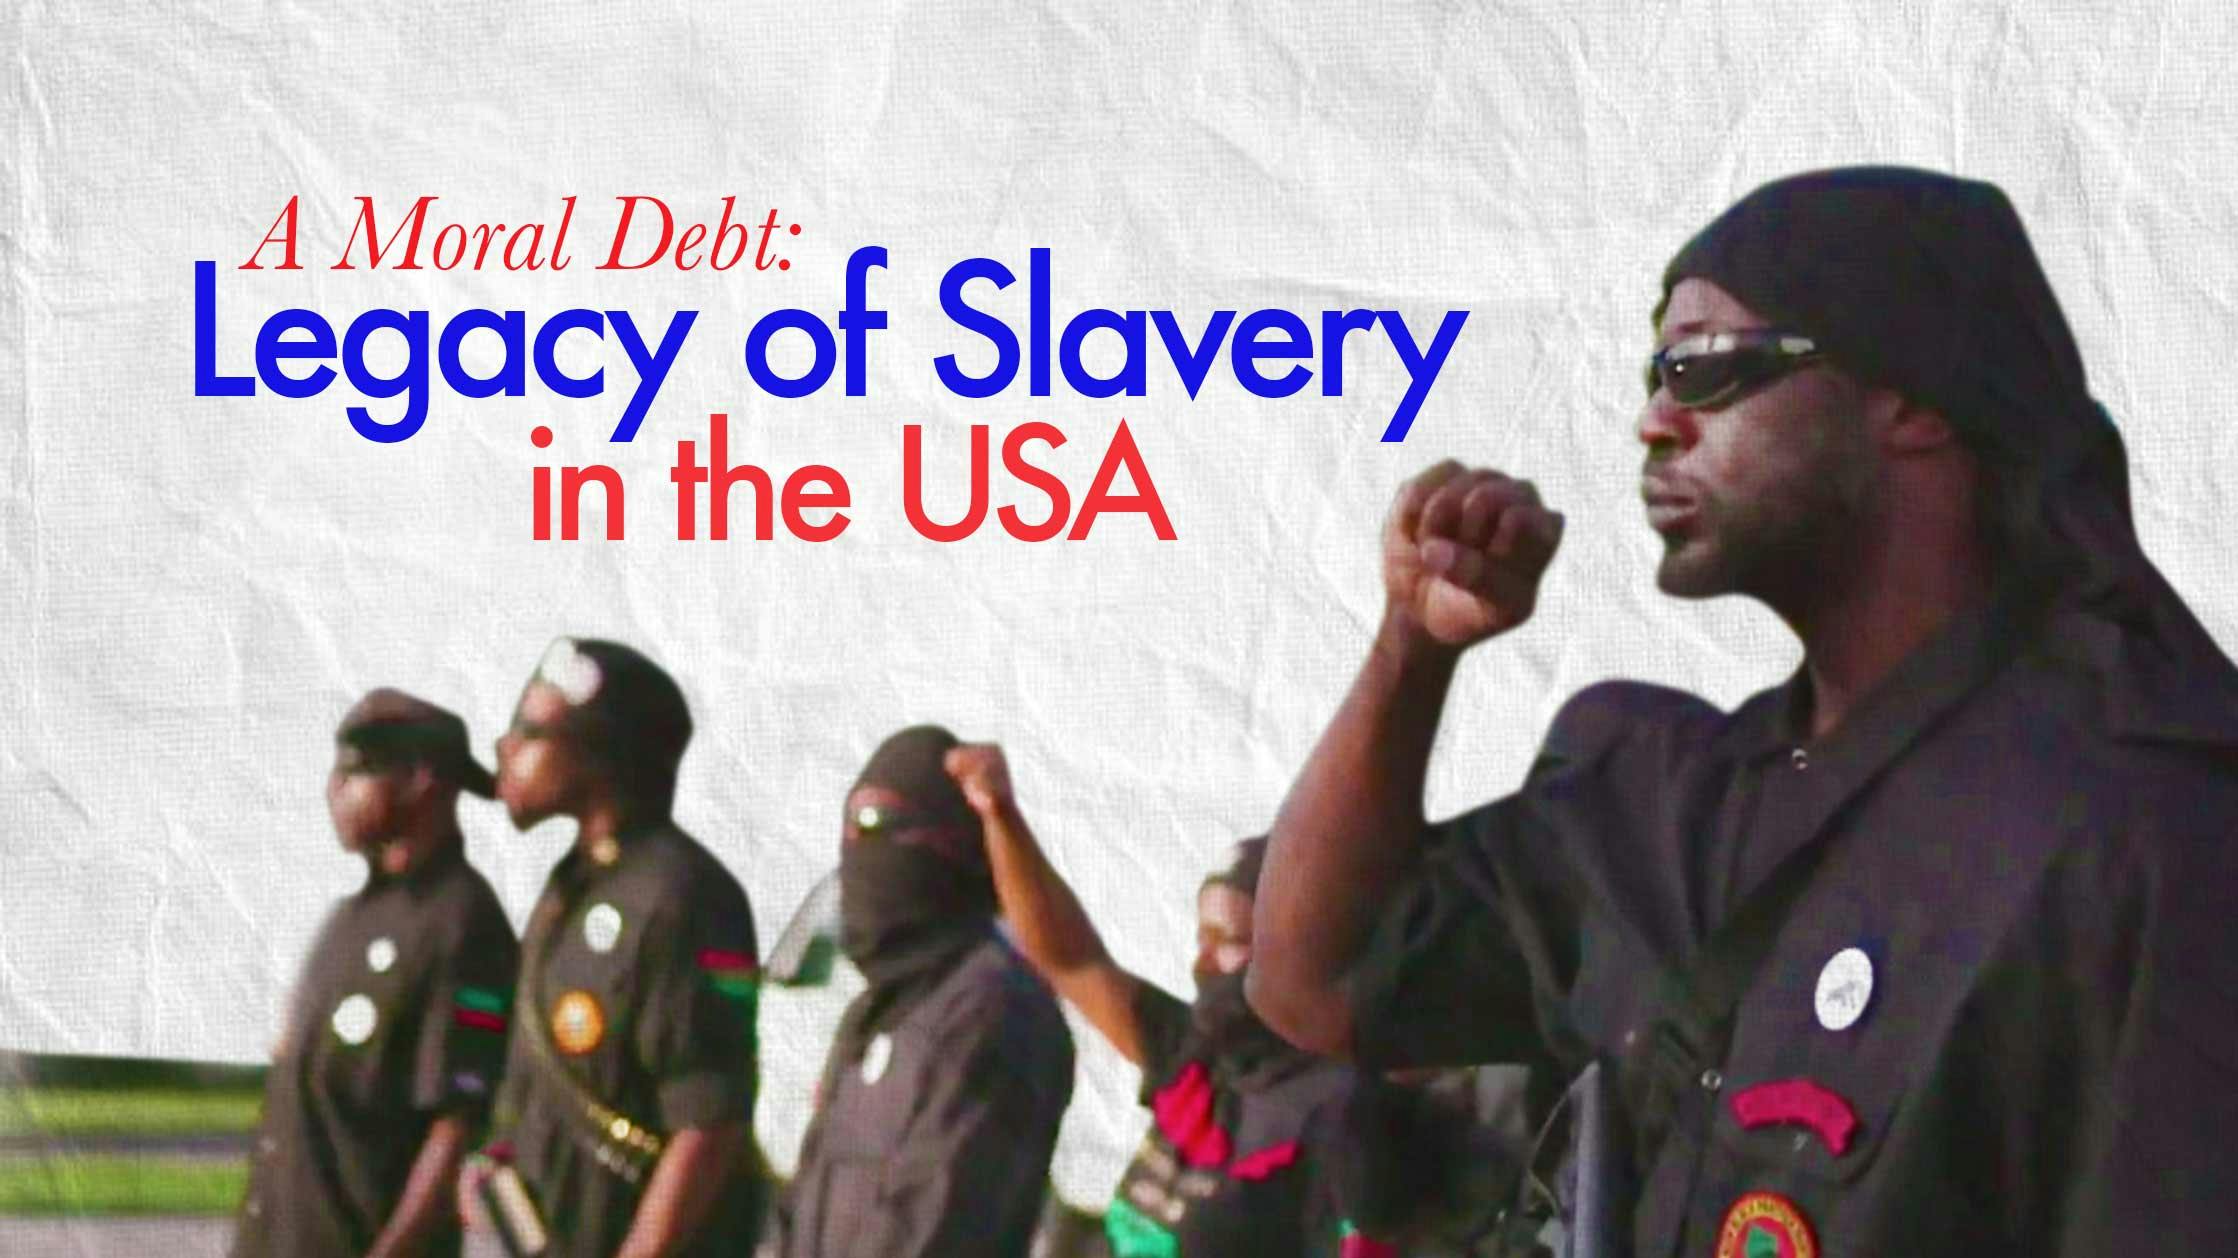 A Moral Debt: The Legacy of Slavery in the USA